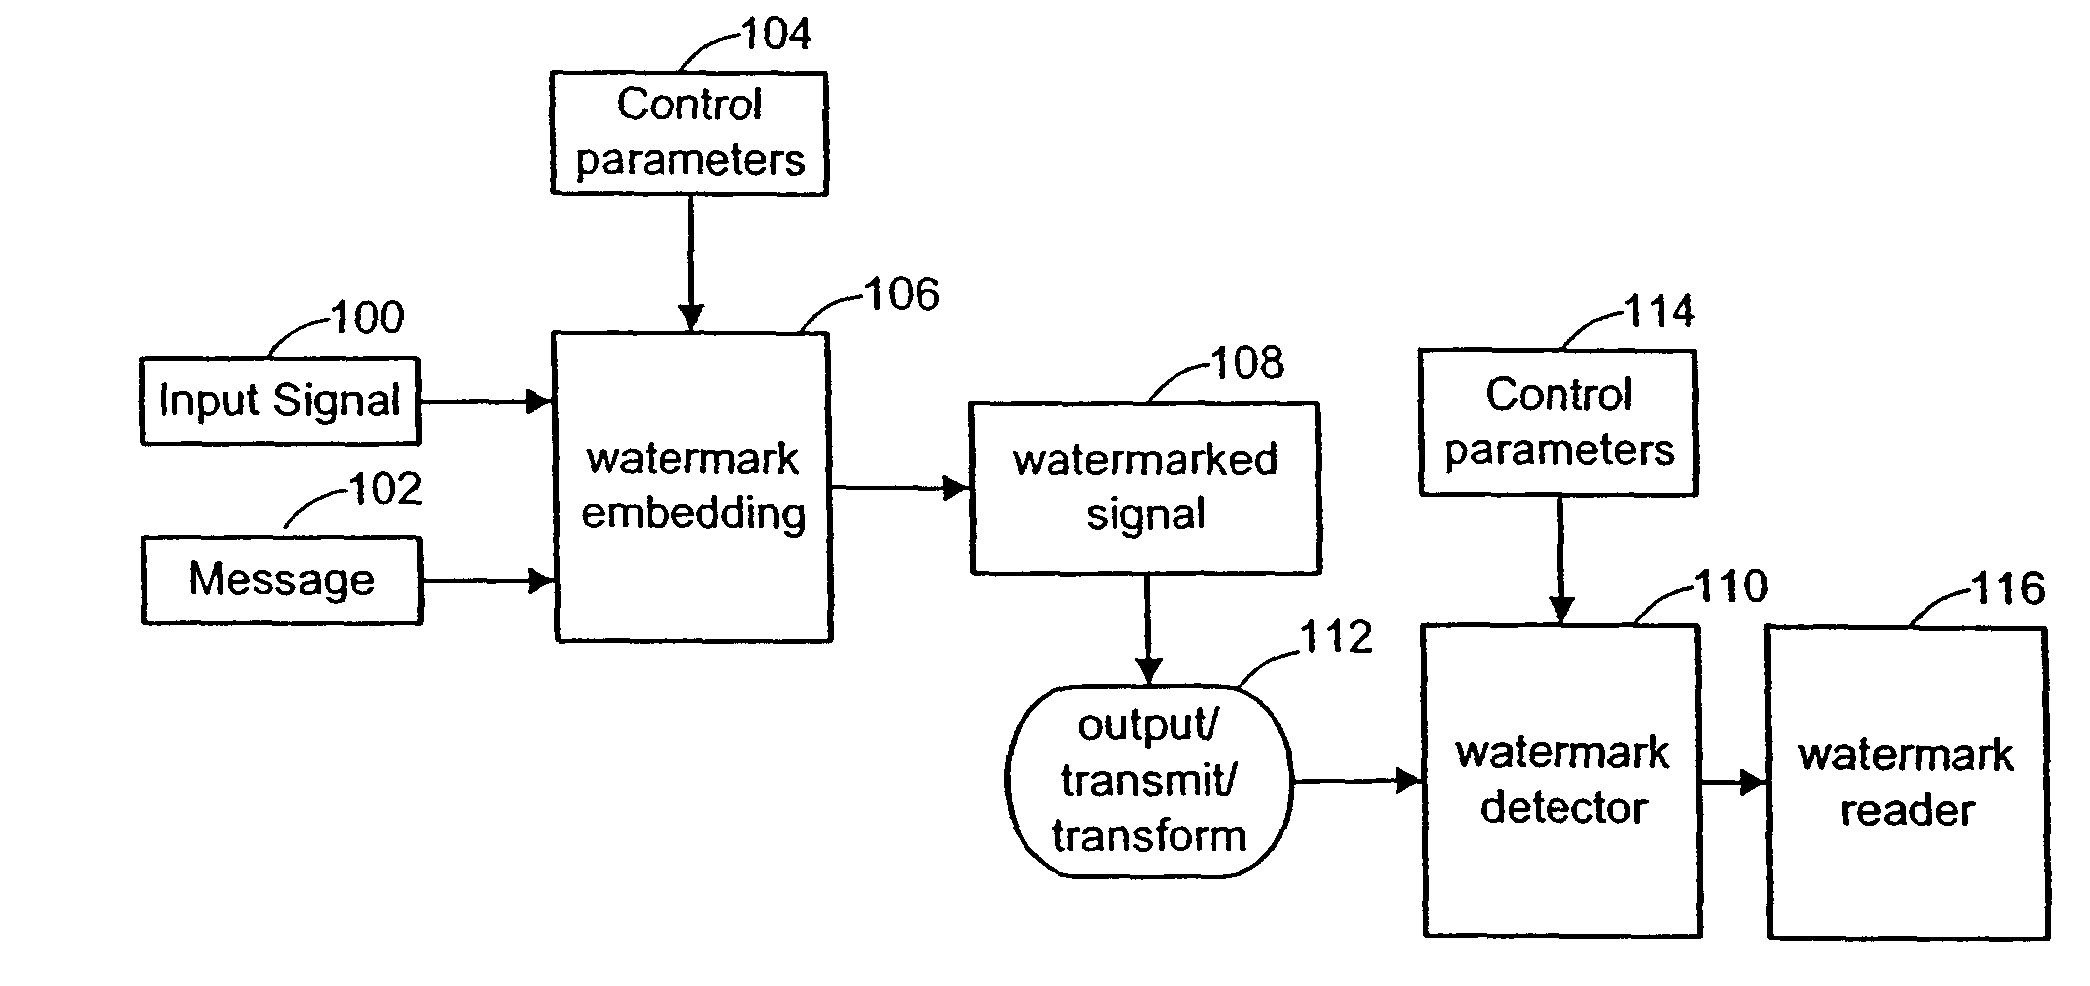 Authentication of physical and electronic media objects using digital watermarks